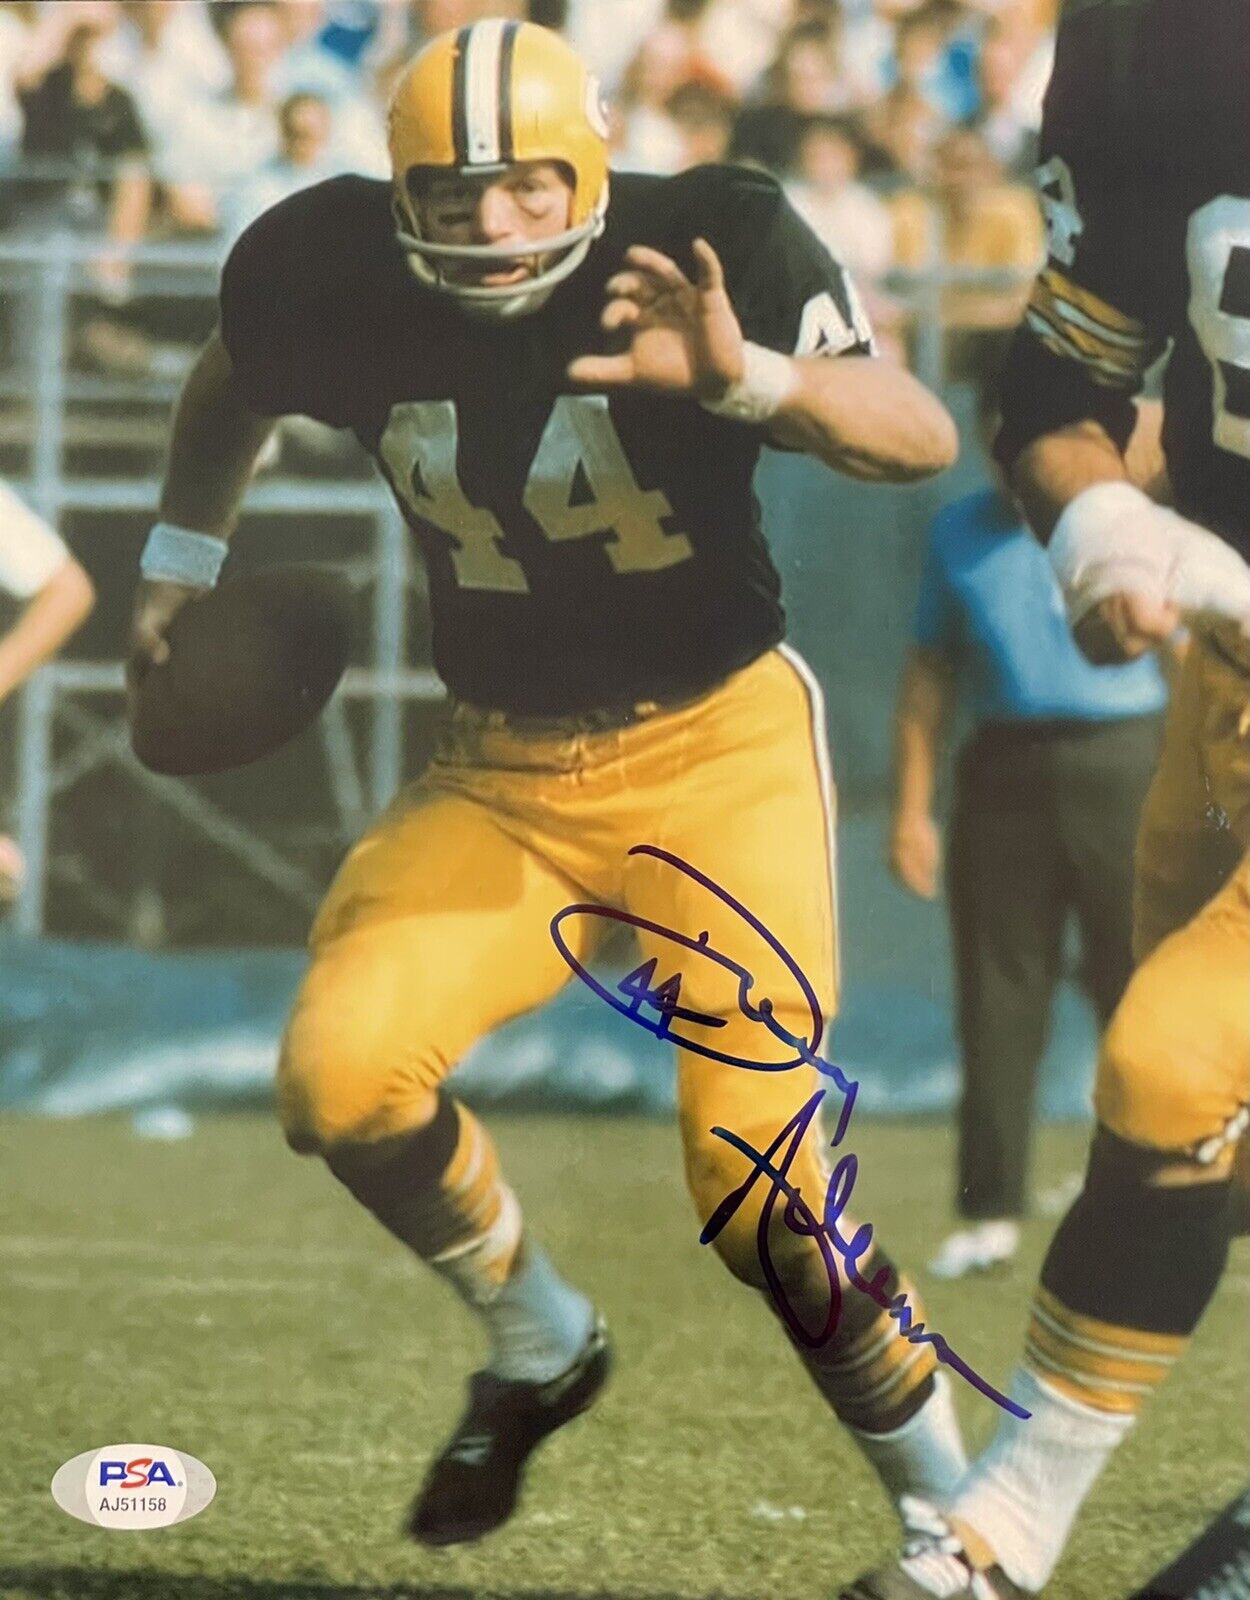 Donny Anderson Signed Autographed Green Bay Packers 8x10 Photo Poster painting PSA/DNA